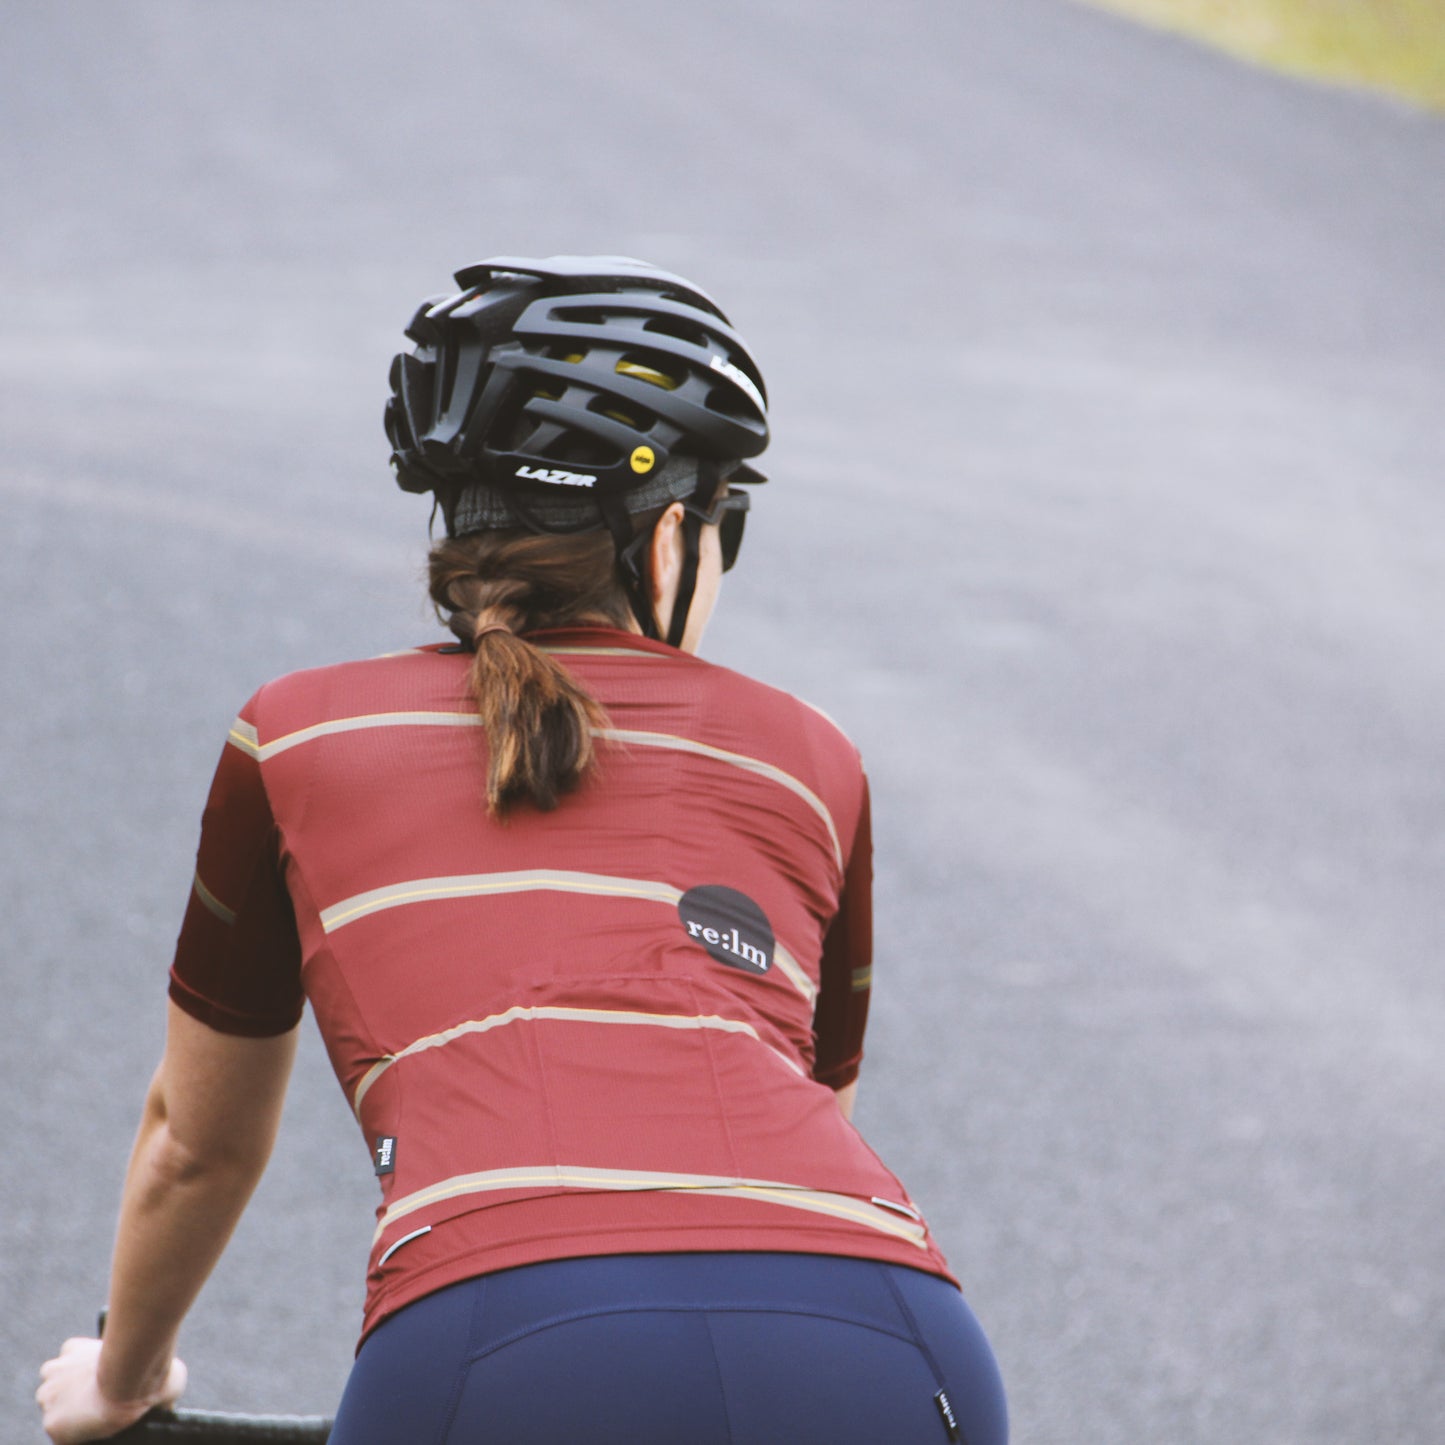 Woman riding bike wearing Relm Cycling jersey in offset design and Lazer helmet